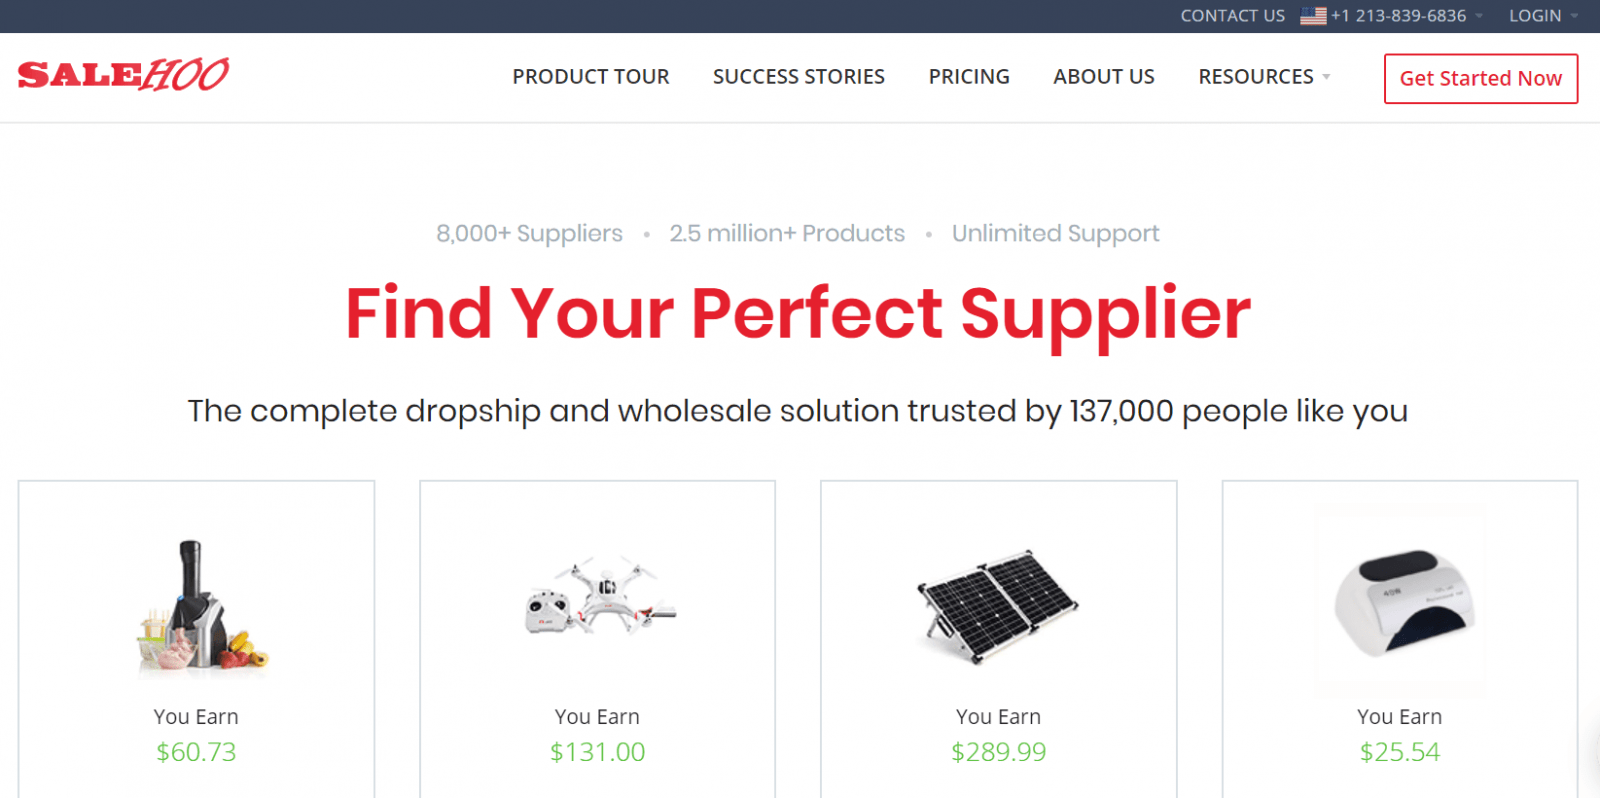 dropshipping suppliers directories to start a drop shipping business online